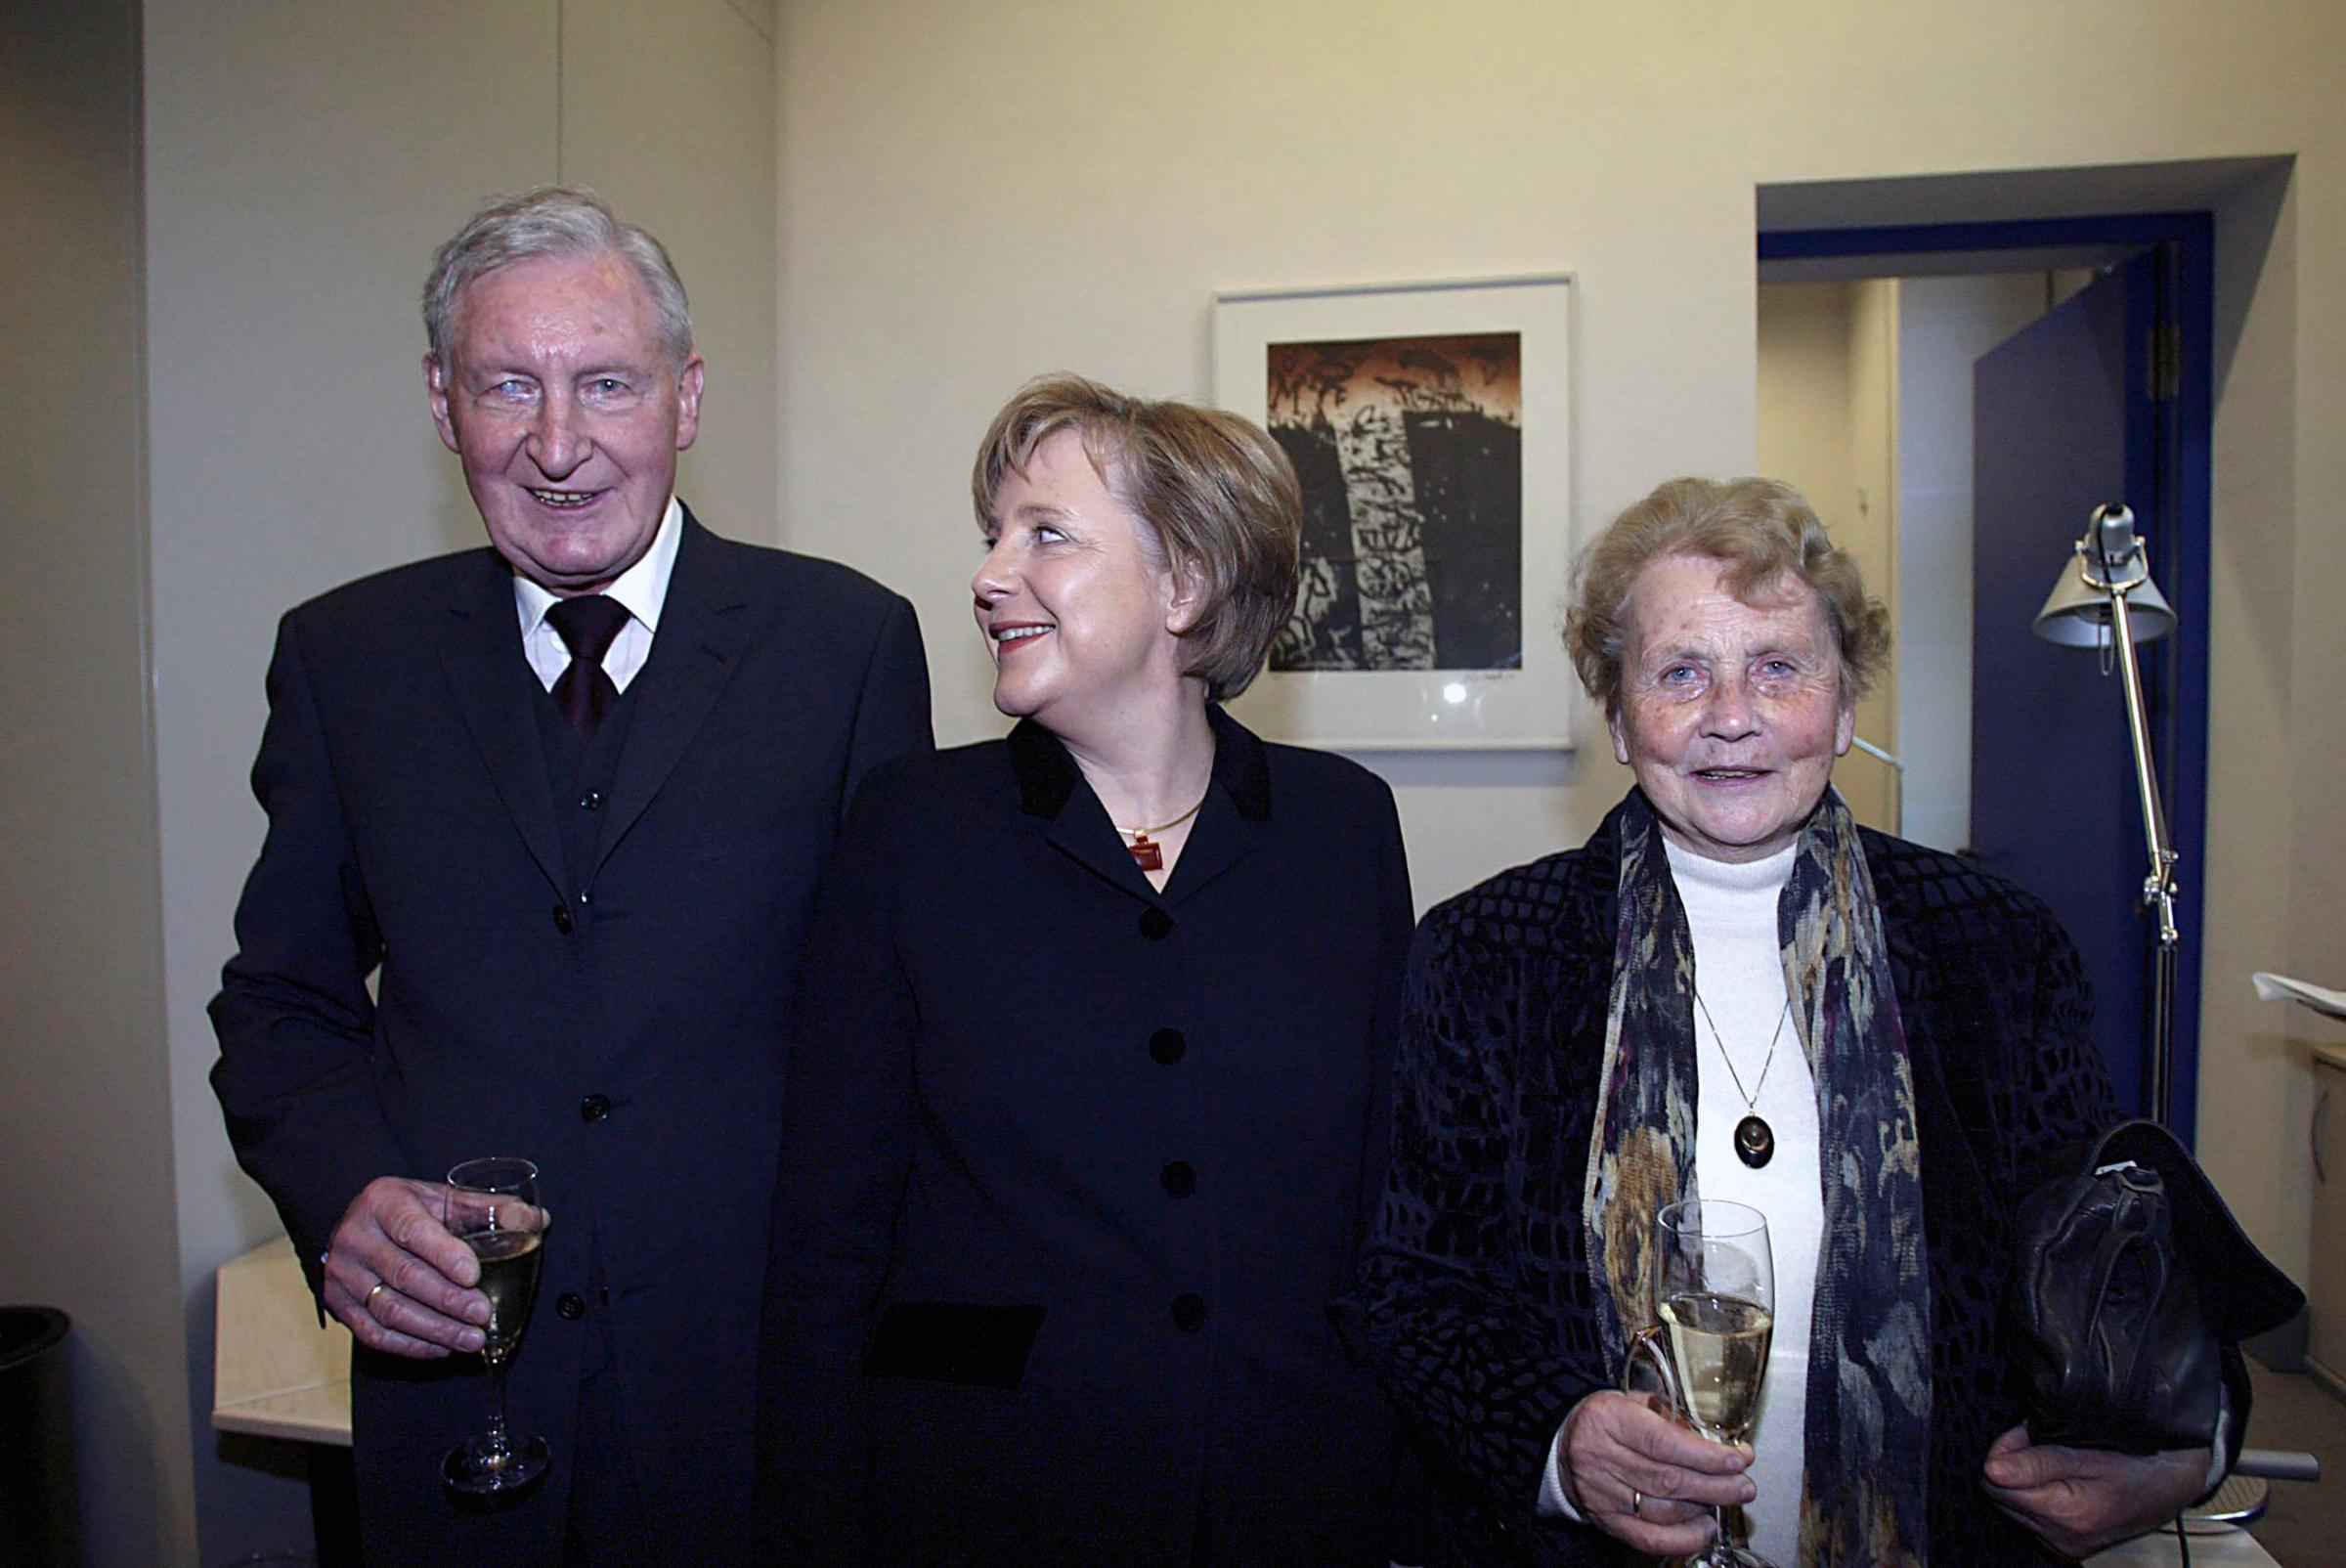 Angela Merkel on the eve of her election in 2005 with parents Herlind Kasner, Angela Merkel’s mother, from Hamburg. She was a Latin and English teacher. And her father, Horst Kasner, was originally from Berlin. He was a pastor in the Protestant Church in Germany.